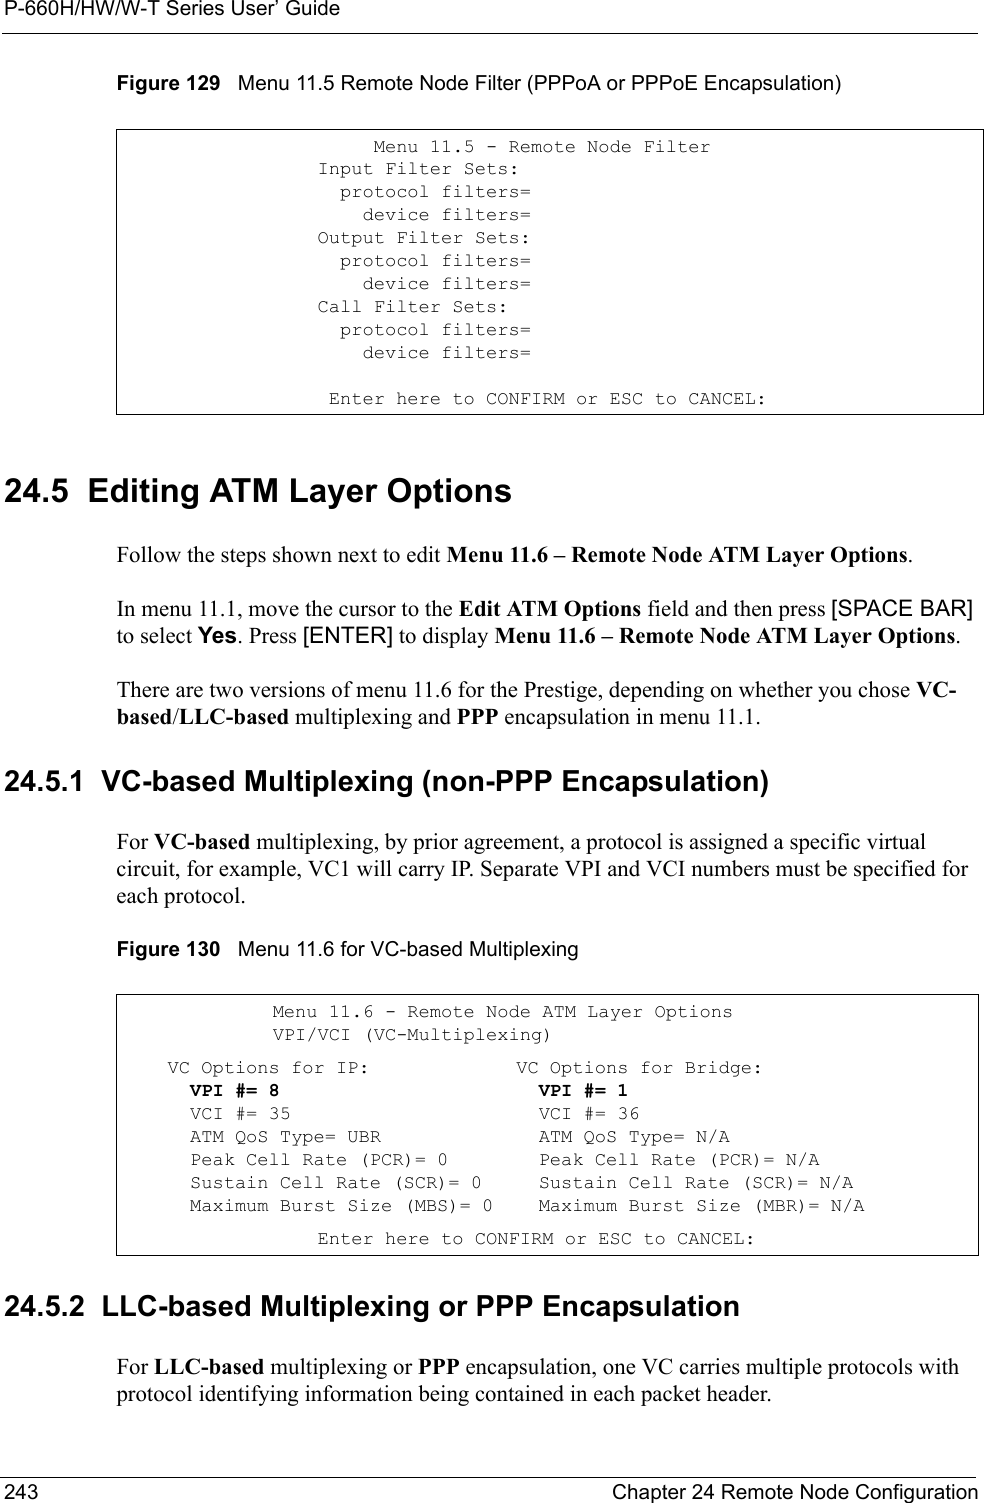 P-660H/HW/W-T Series User’ Guide243 Chapter 24 Remote Node ConfigurationFigure 129   Menu 11.5 Remote Node Filter (PPPoA or PPPoE Encapsulation) 24.5  Editing ATM Layer Options Follow the steps shown next to edit Menu 11.6 – Remote Node ATM Layer Options.In menu 11.1, move the cursor to the Edit ATM Options field and then press [SPACE BAR] to select Yes. Press [ENTER] to display Menu 11.6 – Remote Node ATM Layer Options.There are two versions of menu 11.6 for the Prestige, depending on whether you chose VC-based/LLC-based multiplexing and PPP encapsulation in menu 11.1.24.5.1  VC-based Multiplexing (non-PPP Encapsulation)For VC-based multiplexing, by prior agreement, a protocol is assigned a specific virtual circuit, for example, VC1 will carry IP. Separate VPI and VCI numbers must be specified for each protocol.Figure 130   Menu 11.6 for VC-based Multiplexing24.5.2  LLC-based Multiplexing or PPP EncapsulationFor LLC-based multiplexing or PPP encapsulation, one VC carries multiple protocols with protocol identifying information being contained in each packet header.         Menu 11.5 - Remote Node Filter    Input Filter Sets:      protocol filters=        device filters=    Output Filter Sets:      protocol filters=        device filters=    Call Filter Sets:      protocol filters=        device filters=     Enter here to CONFIRM or ESC to CANCEL:Menu 11.6 - Remote Node ATM Layer OptionsVPI/VCI (VC-Multiplexing)    VC Options for IP:      VPI #= 8      VCI #= 35      ATM QoS Type= UBR      Peak Cell Rate (PCR)= 0      Sustain Cell Rate (SCR)= 0      Maximum Burst Size (MBS)= 0VC Options for Bridge:  VPI #= 1  VCI #= 36  ATM QoS Type= N/A  Peak Cell Rate (PCR)= N/A  Sustain Cell Rate (SCR)= N/A  Maximum Burst Size (MBR)= N/A    Enter here to CONFIRM or ESC to CANCEL: